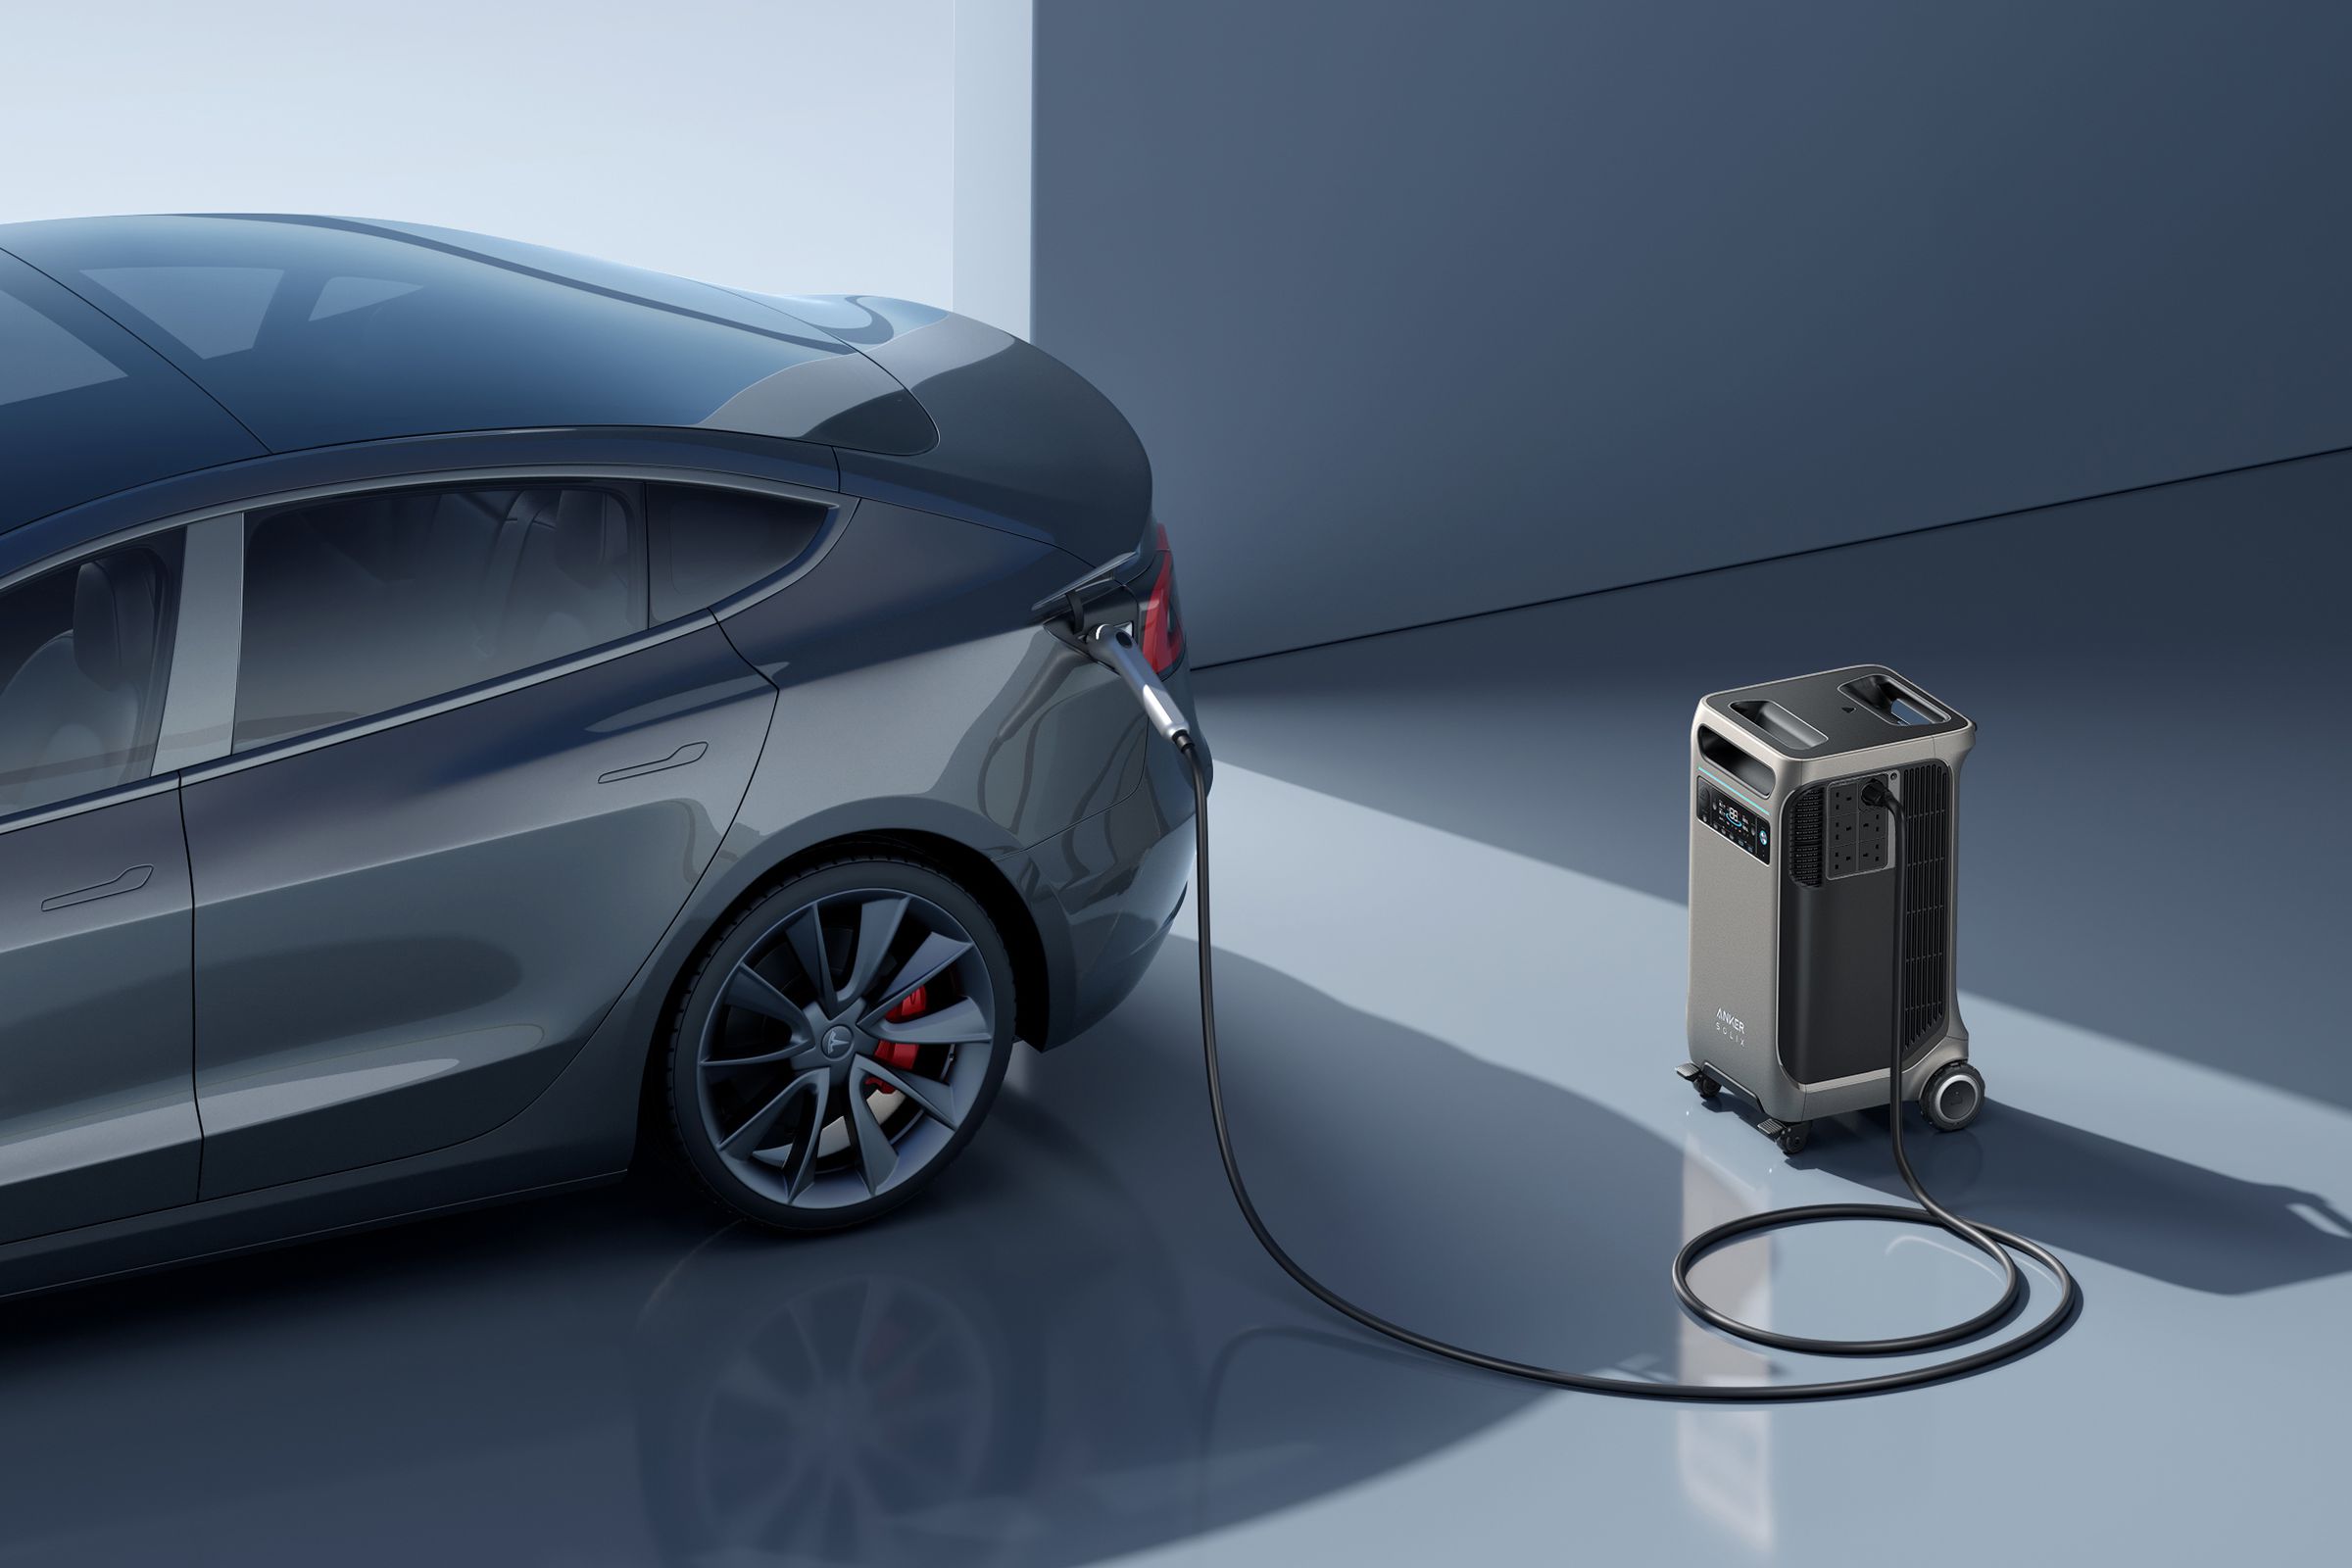 Charge your EV at 6,000W/240V for a dozen or so extra miles of range in an emergency — or more with expansion packs.